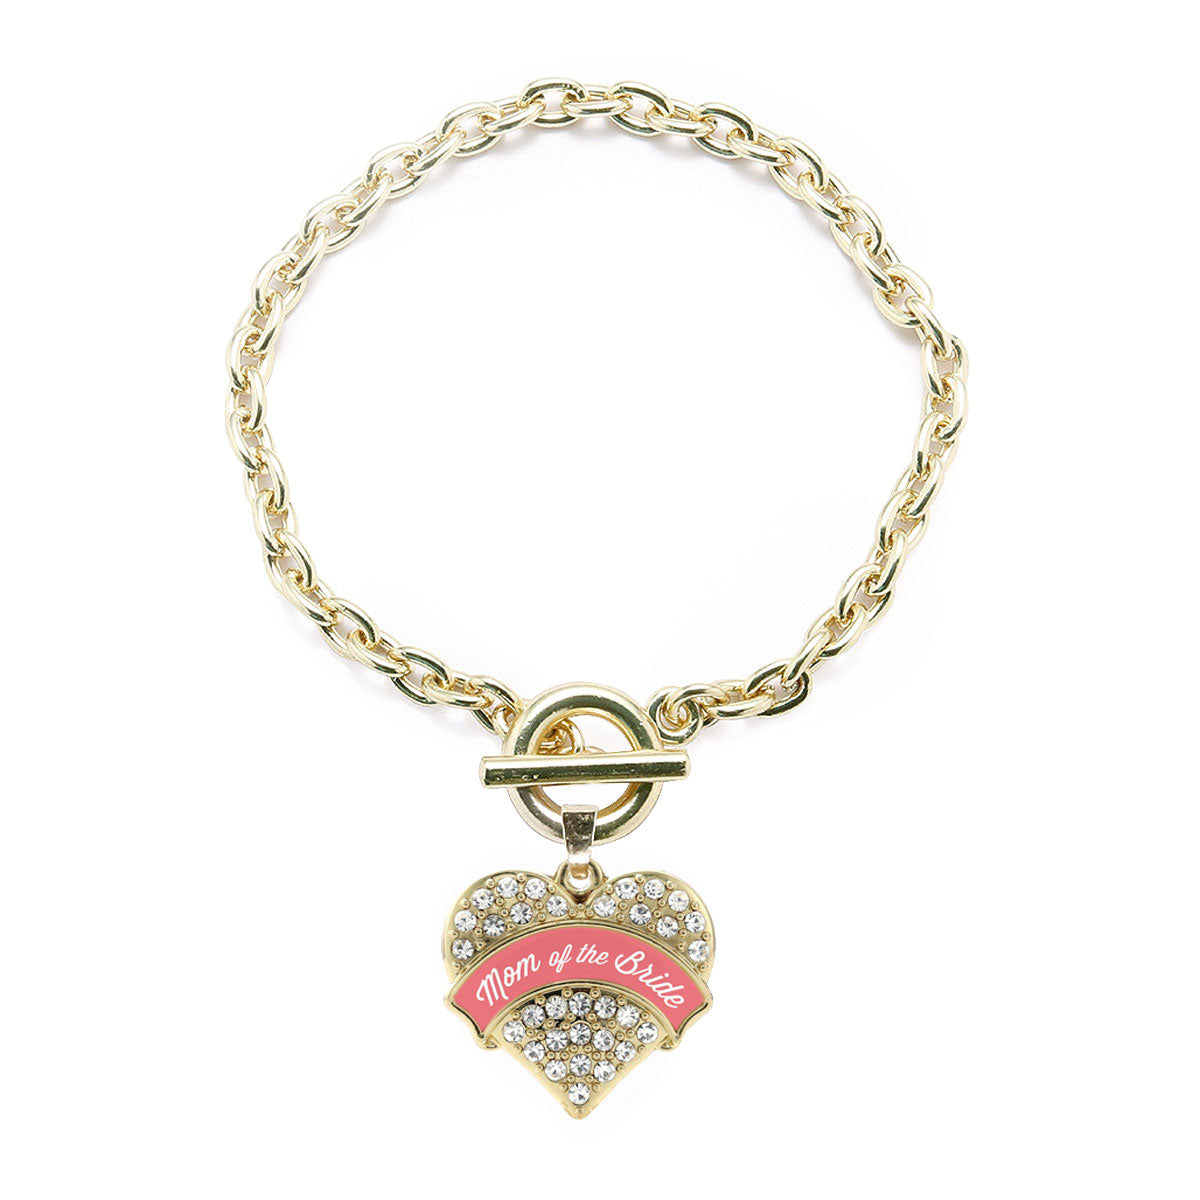 Gold Coral Mom of Bride Pave Heart Charm Toggle Bracelet